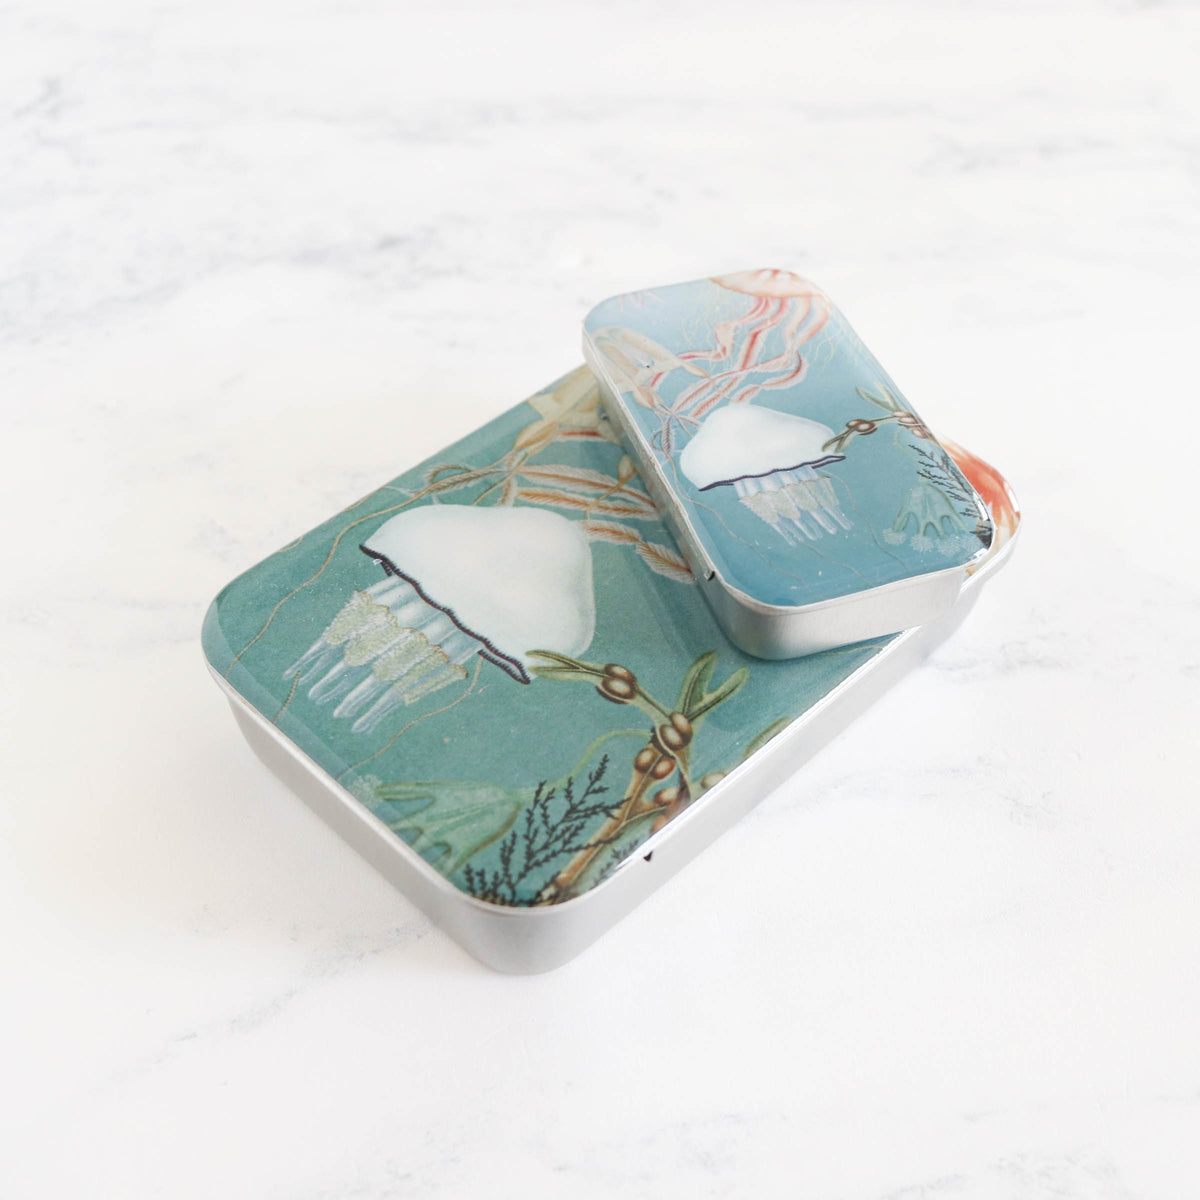 Vintage-Inspired Storage and Notions Tins - Jellyfish